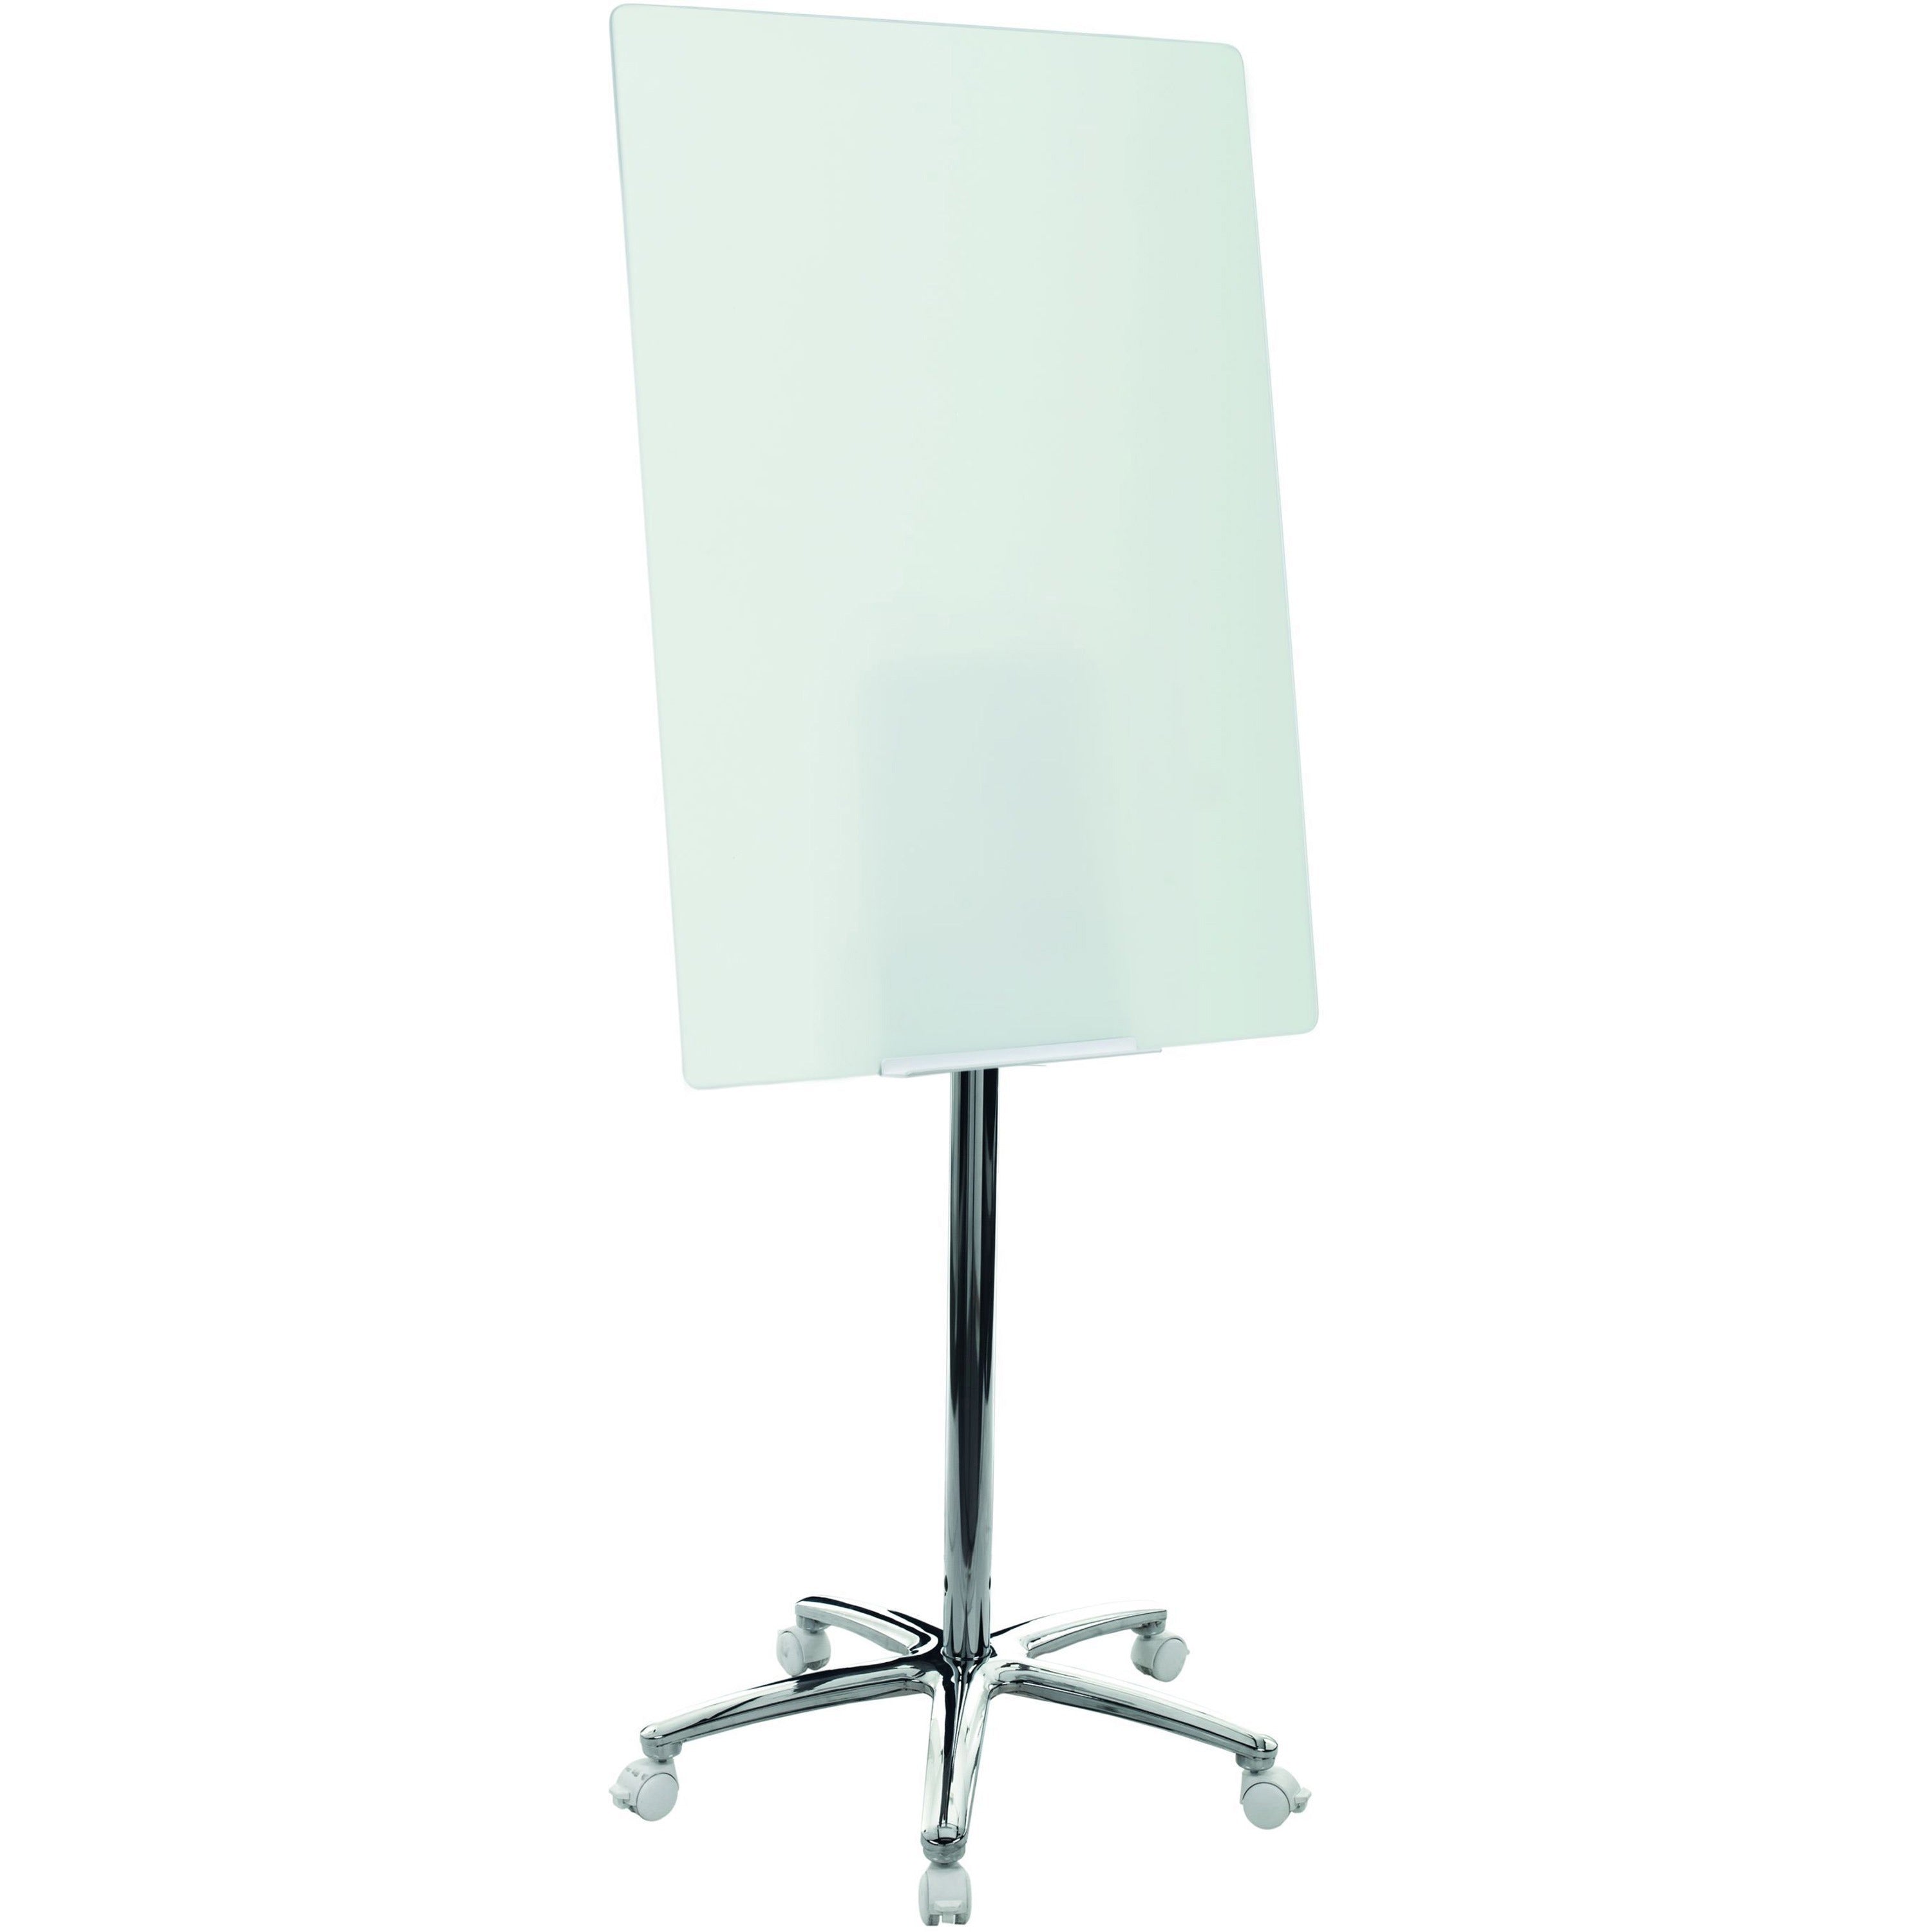 mastervision-super-value-glass-mobile-easel-26-22-ft-width-x-385-32-ft-height-glass-surface-chrome-stand-rectangle-1-each_bvcgea4850126 - 1